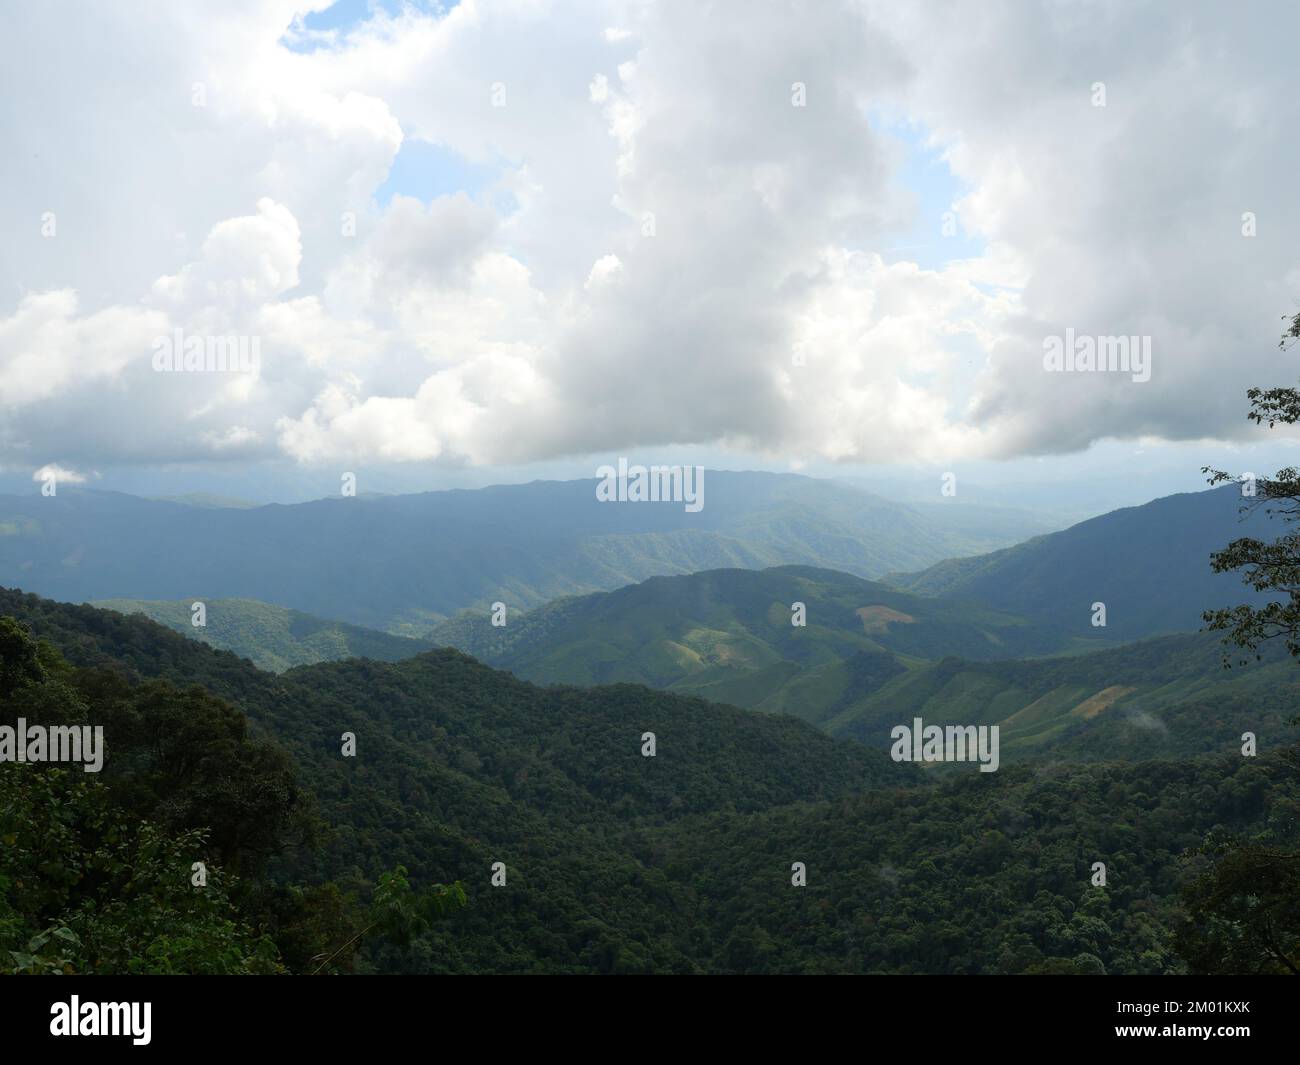 Cloud and fog cover mountain, Mist in valley with green forest and rock at Pua District, Nan Province, Thailand Stock Photo